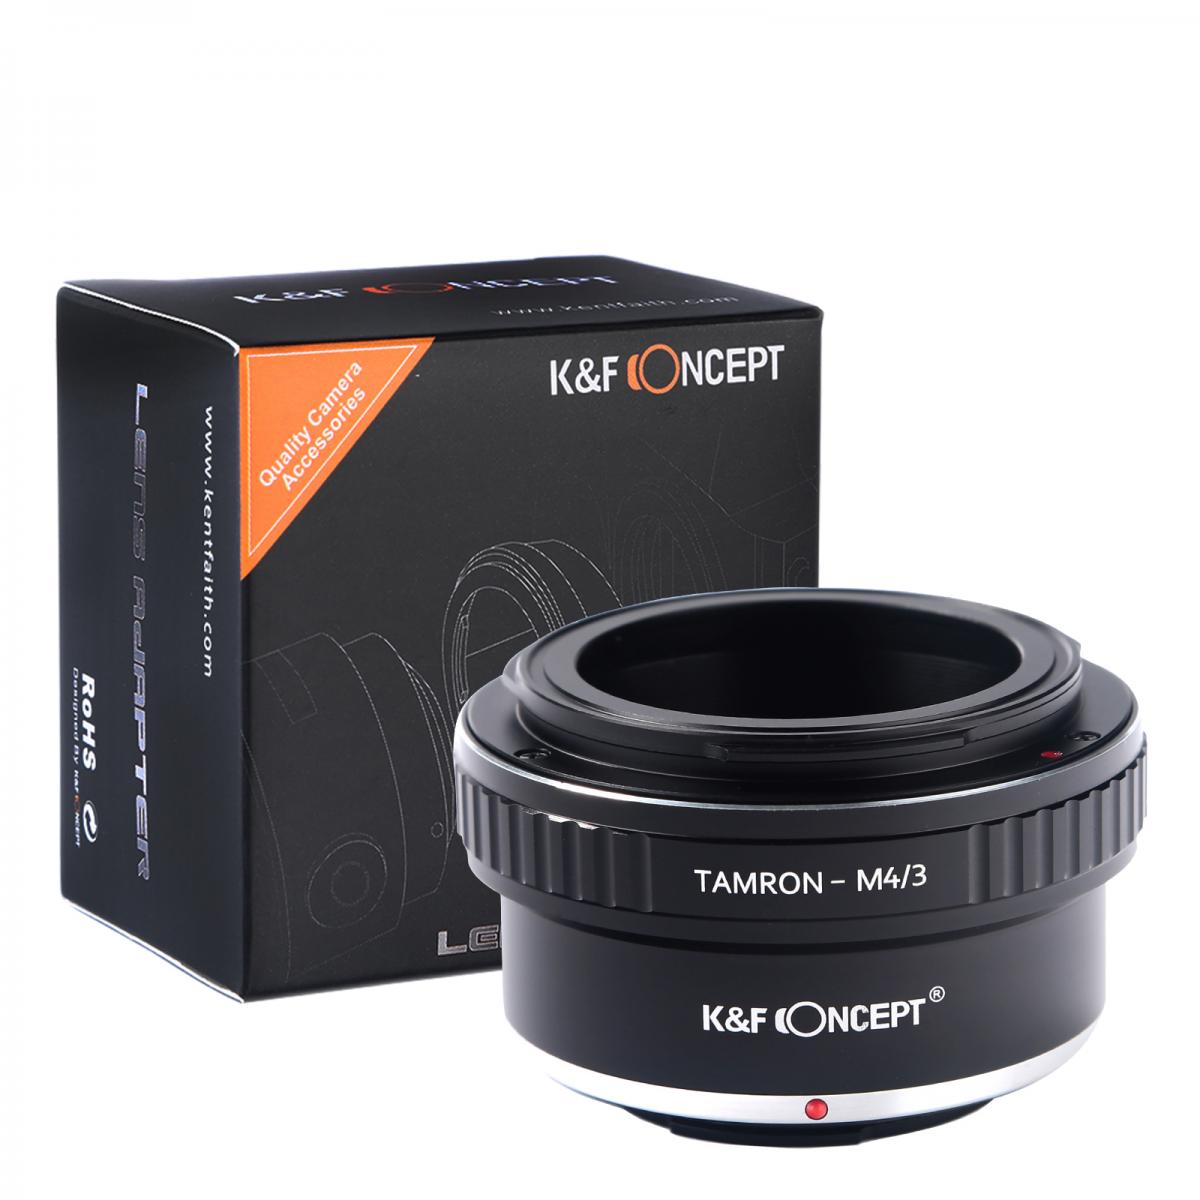 Tamron Adaptall ii Lenses to Micro Four Thirds (M4/3) Camera Mount Adapter